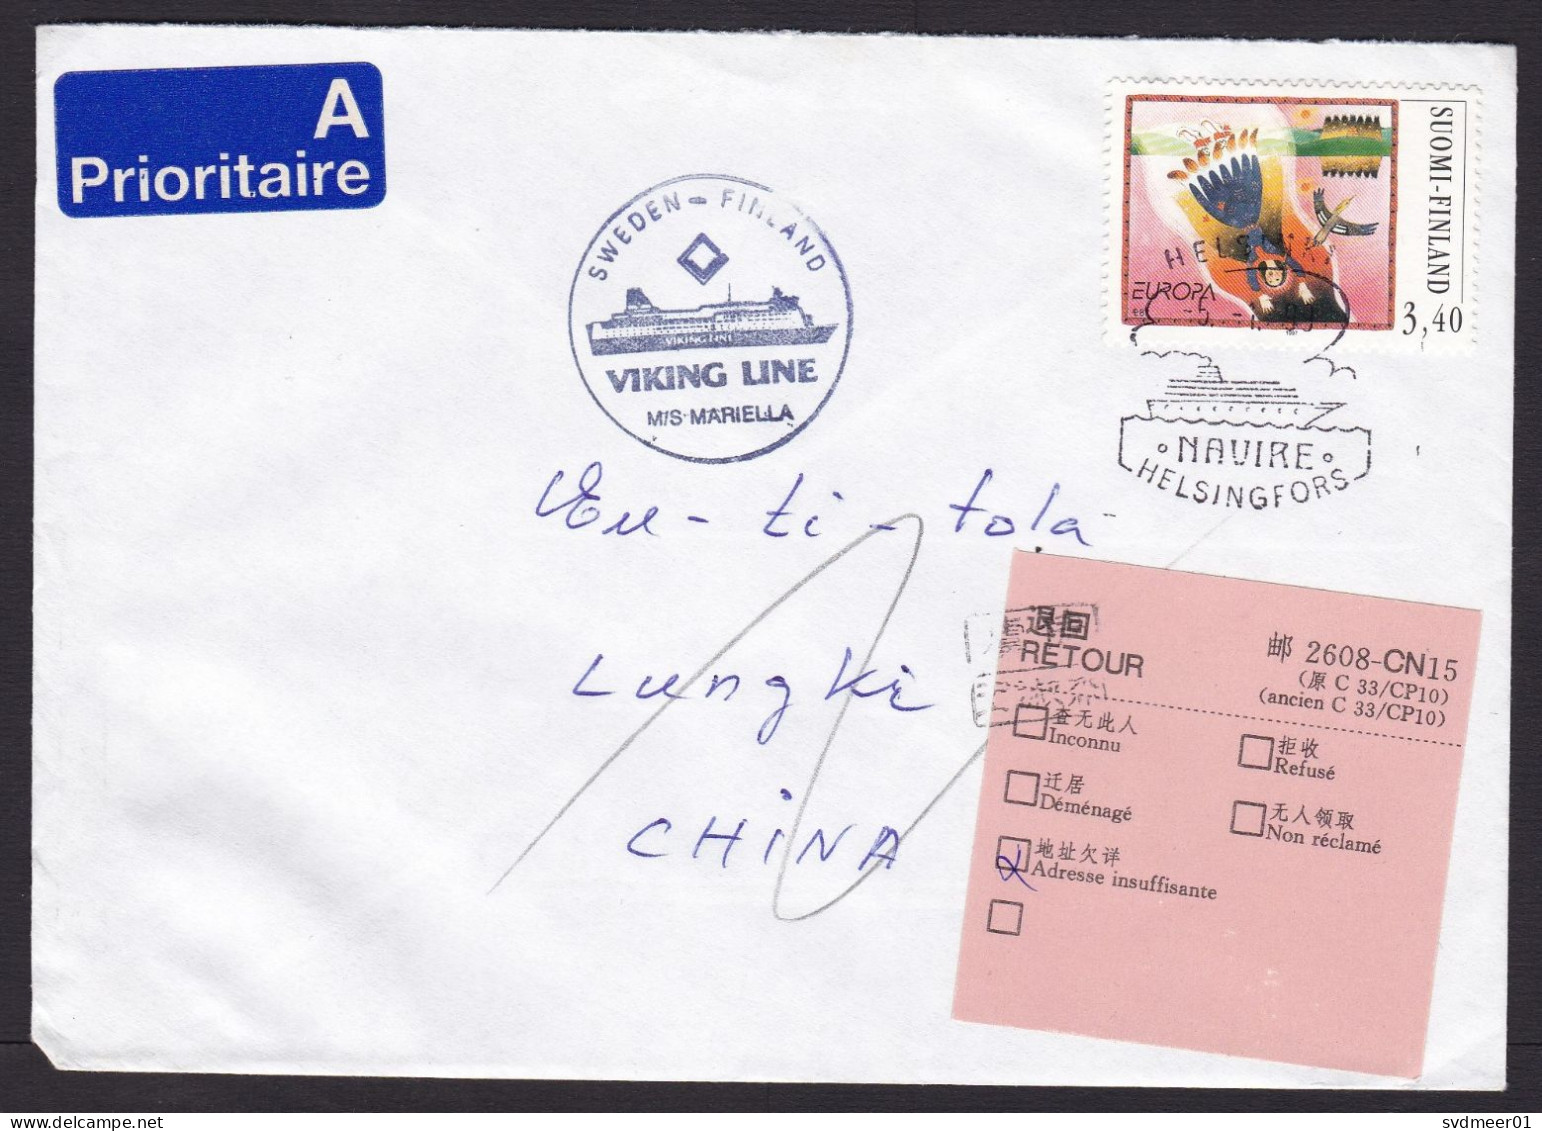 Finland: Cover To China, 1999, 1 Stamp, Ship Cancel Viking Line, Returned, CN15 Retour Label (traces Of Use) - Briefe U. Dokumente